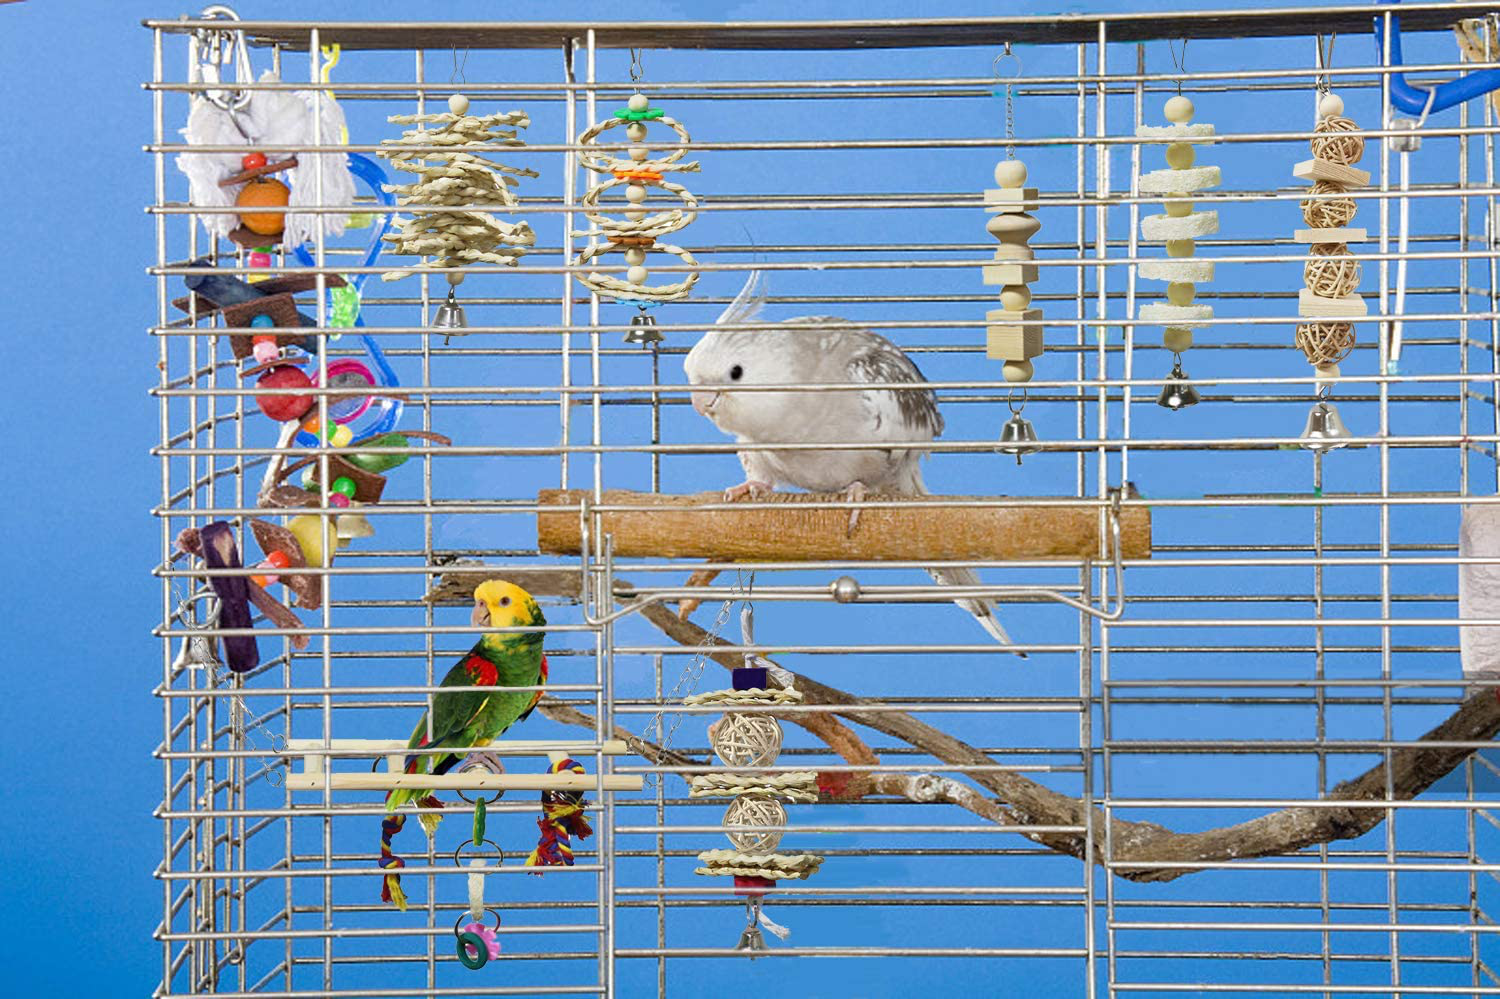 BWOGUE 7 Packs Bird Parrot Toys Natural Wood Chewing Toy Bird Cage Toys Hanging Swing Hammock Climbing Ladders Toys for Small Parakeets, Cockatiels, Conures, Finches,Budgie, Parrots, Love Birds